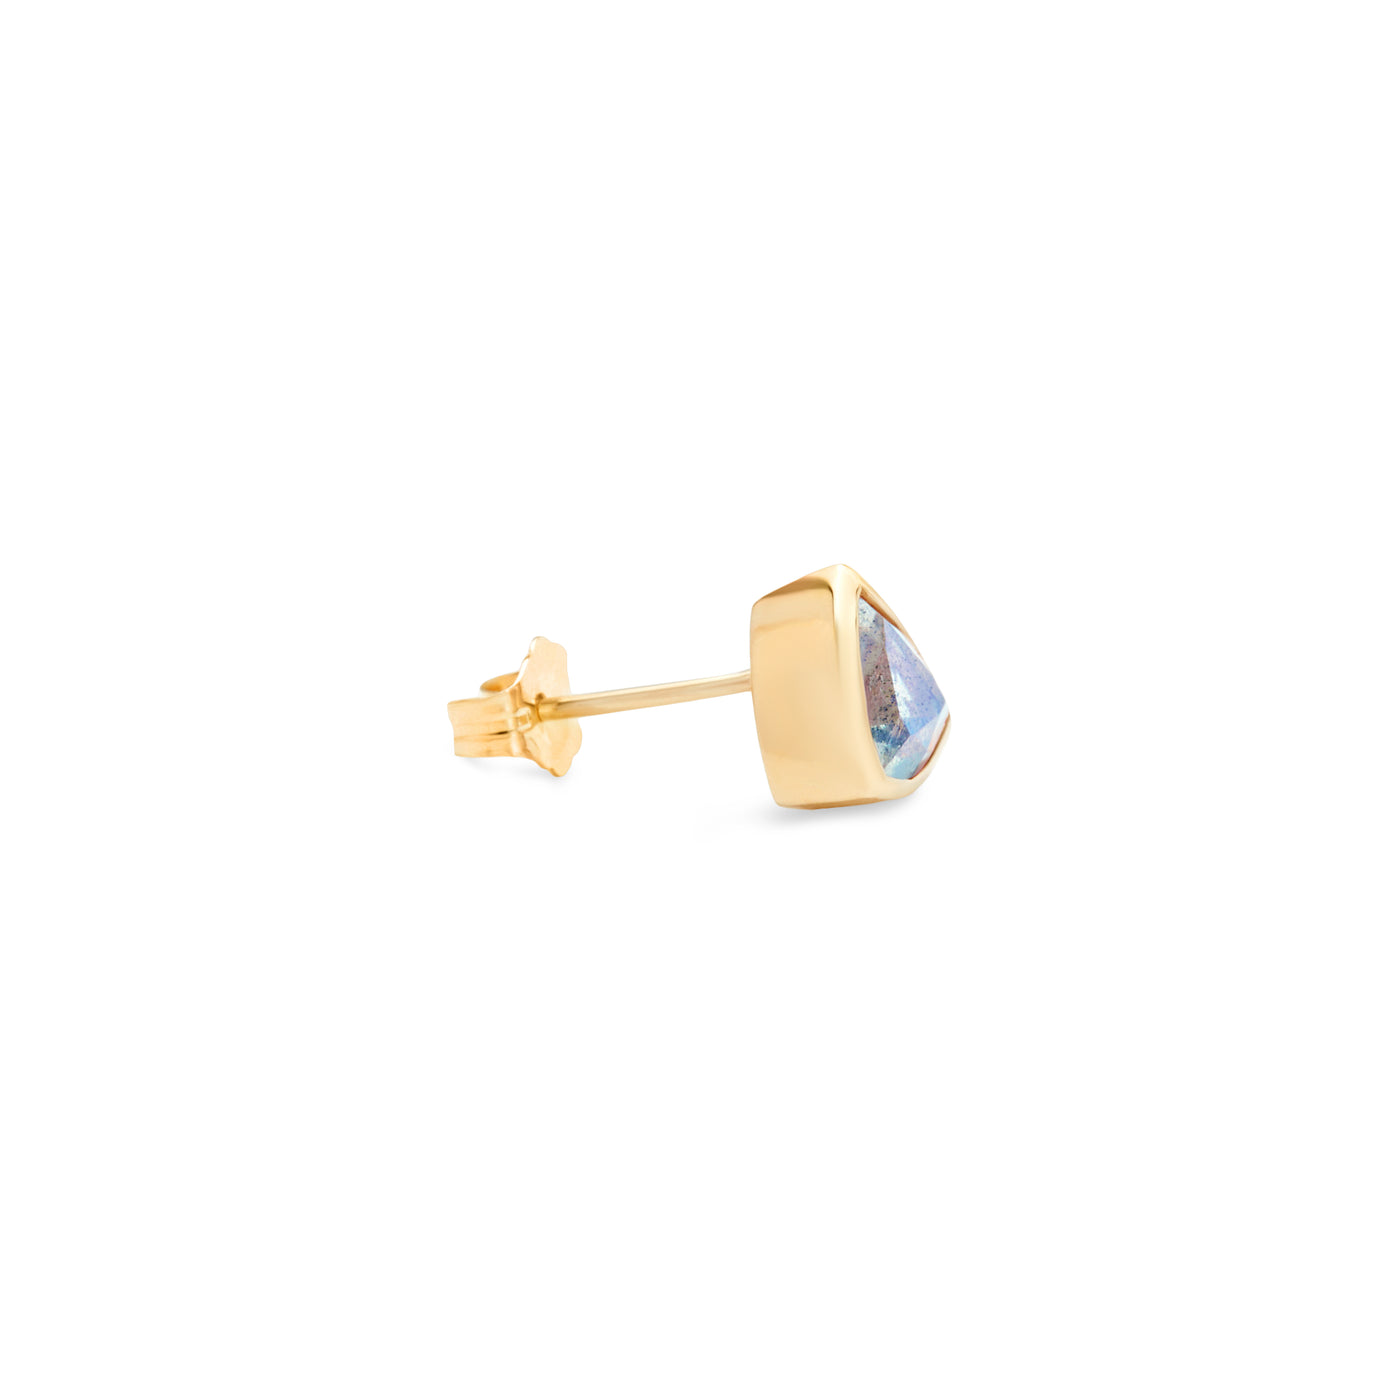 14k Yellow Gold Stud Earring with Blue Labradorite in Triangle Shape laying Flat on White Background Showing Side View